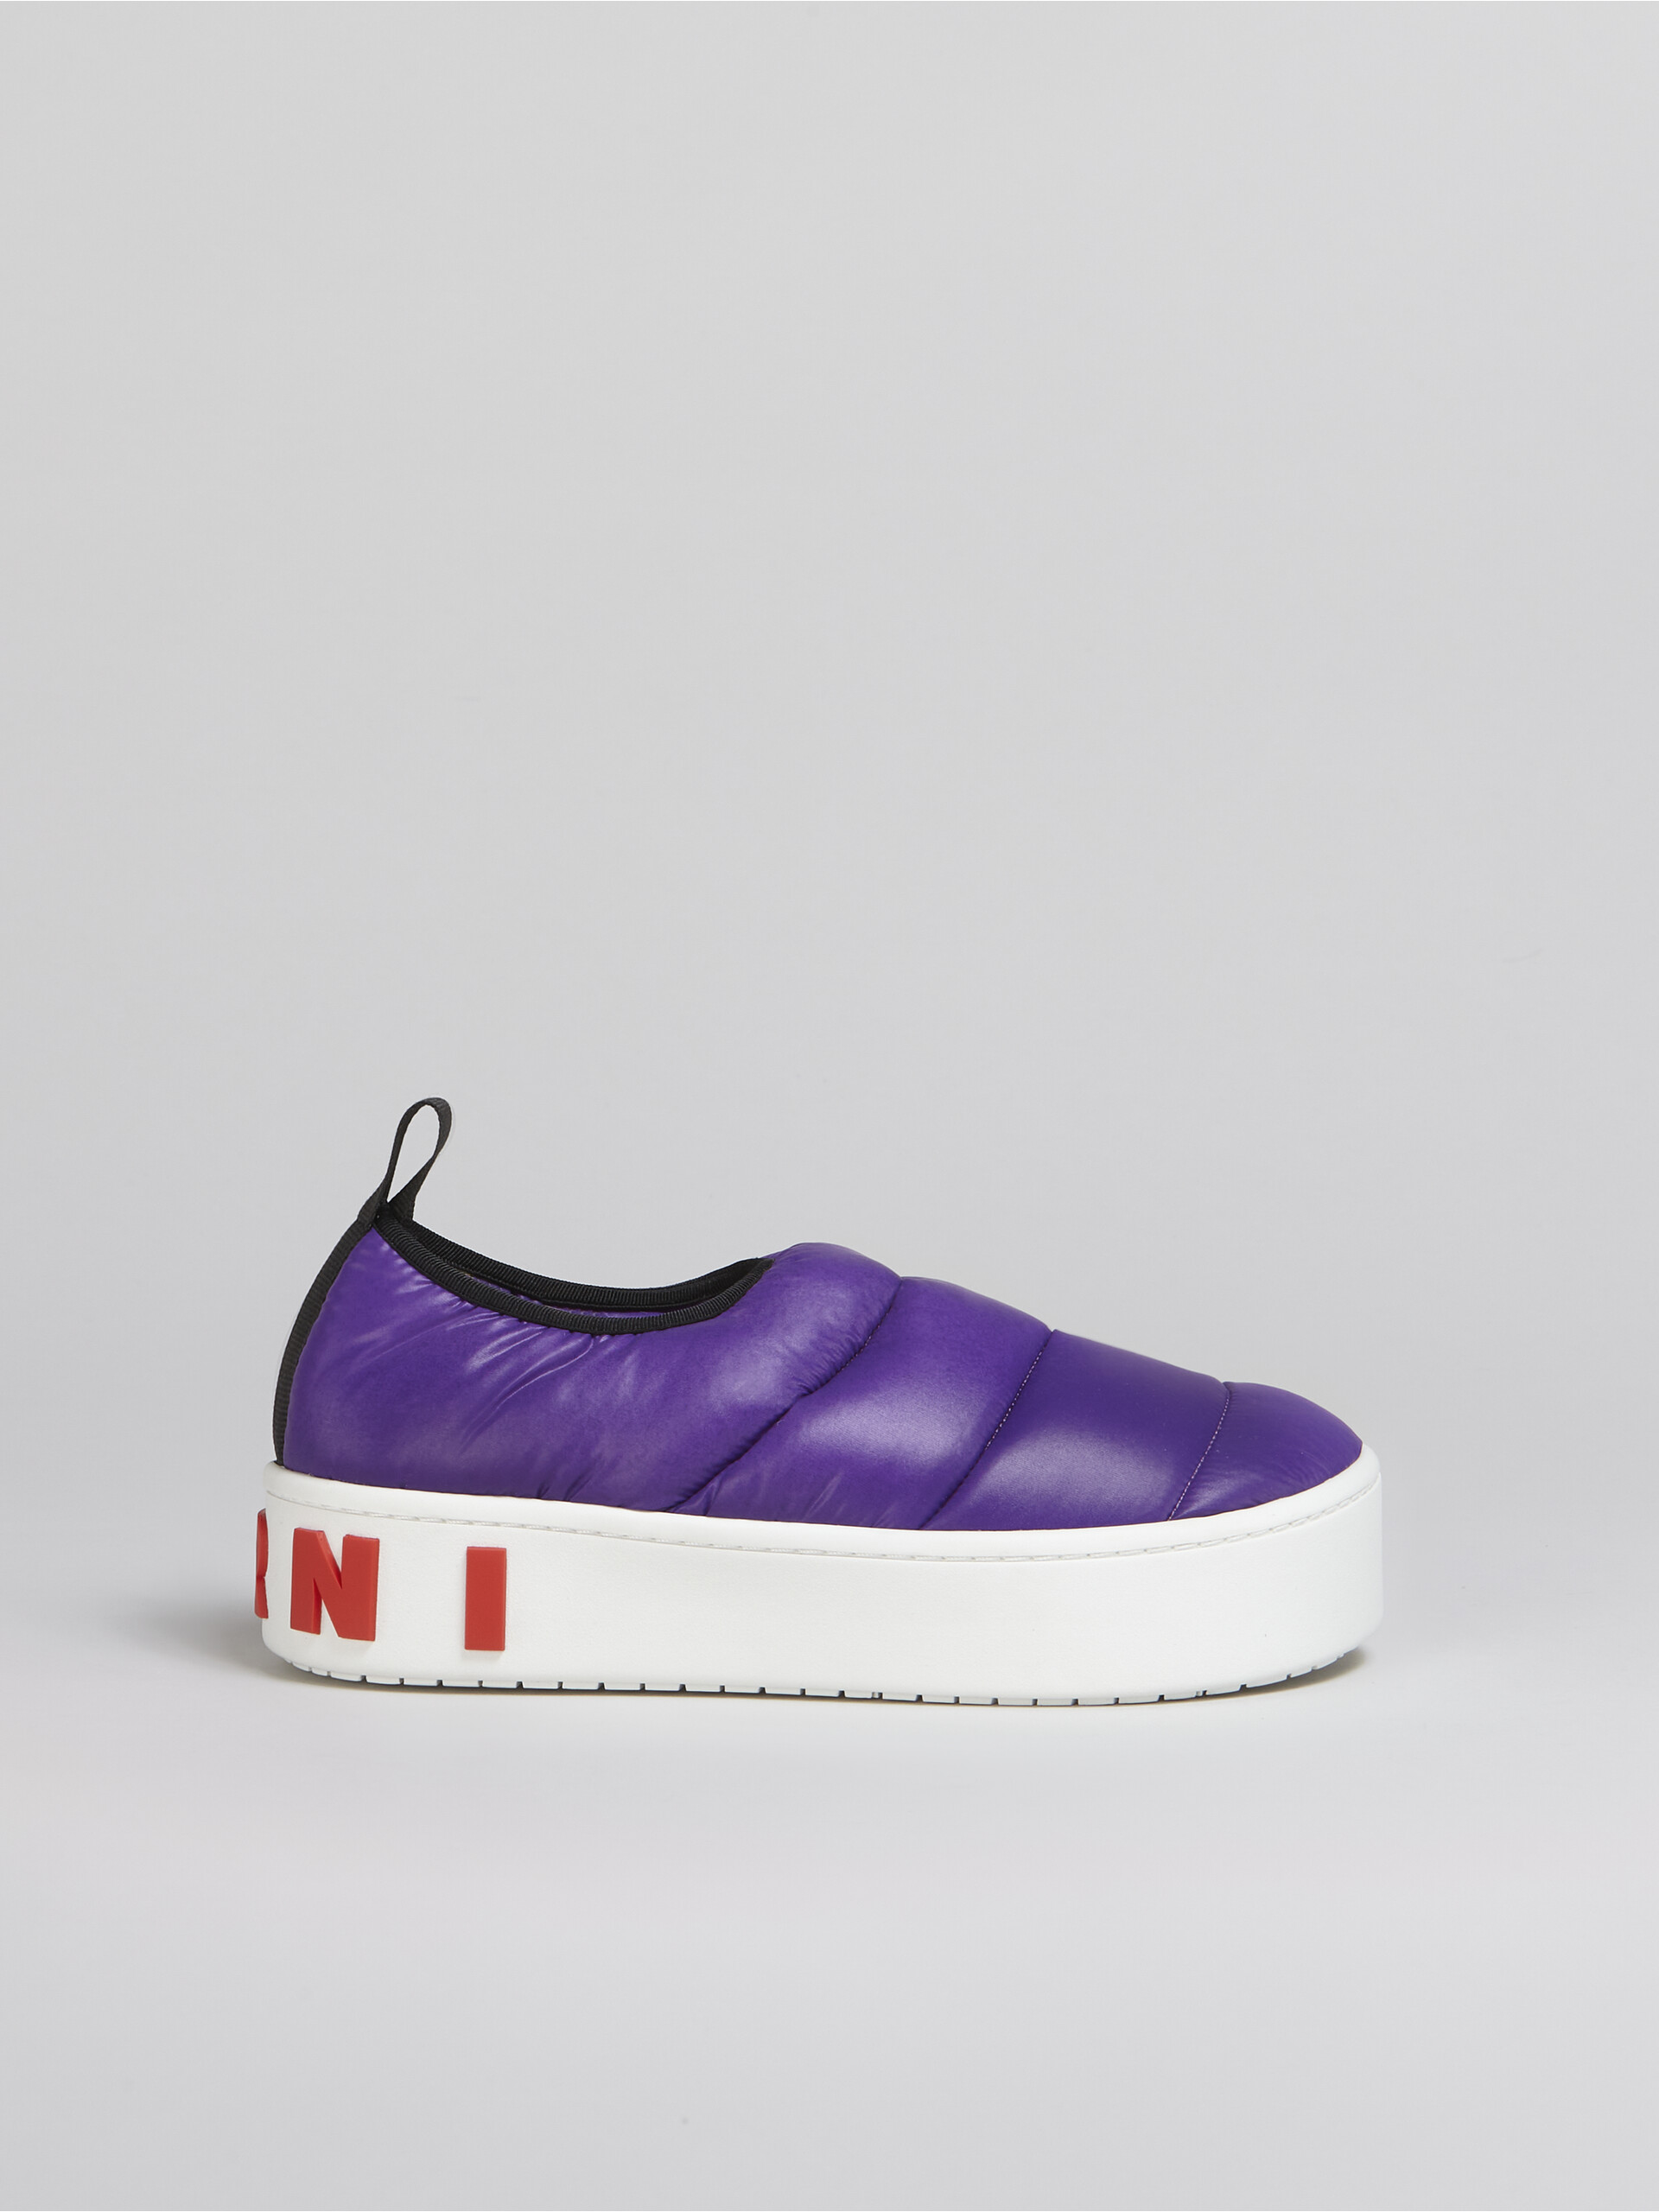 PAW slip-on sneaker in quilted nylon - Sneakers - Image 1